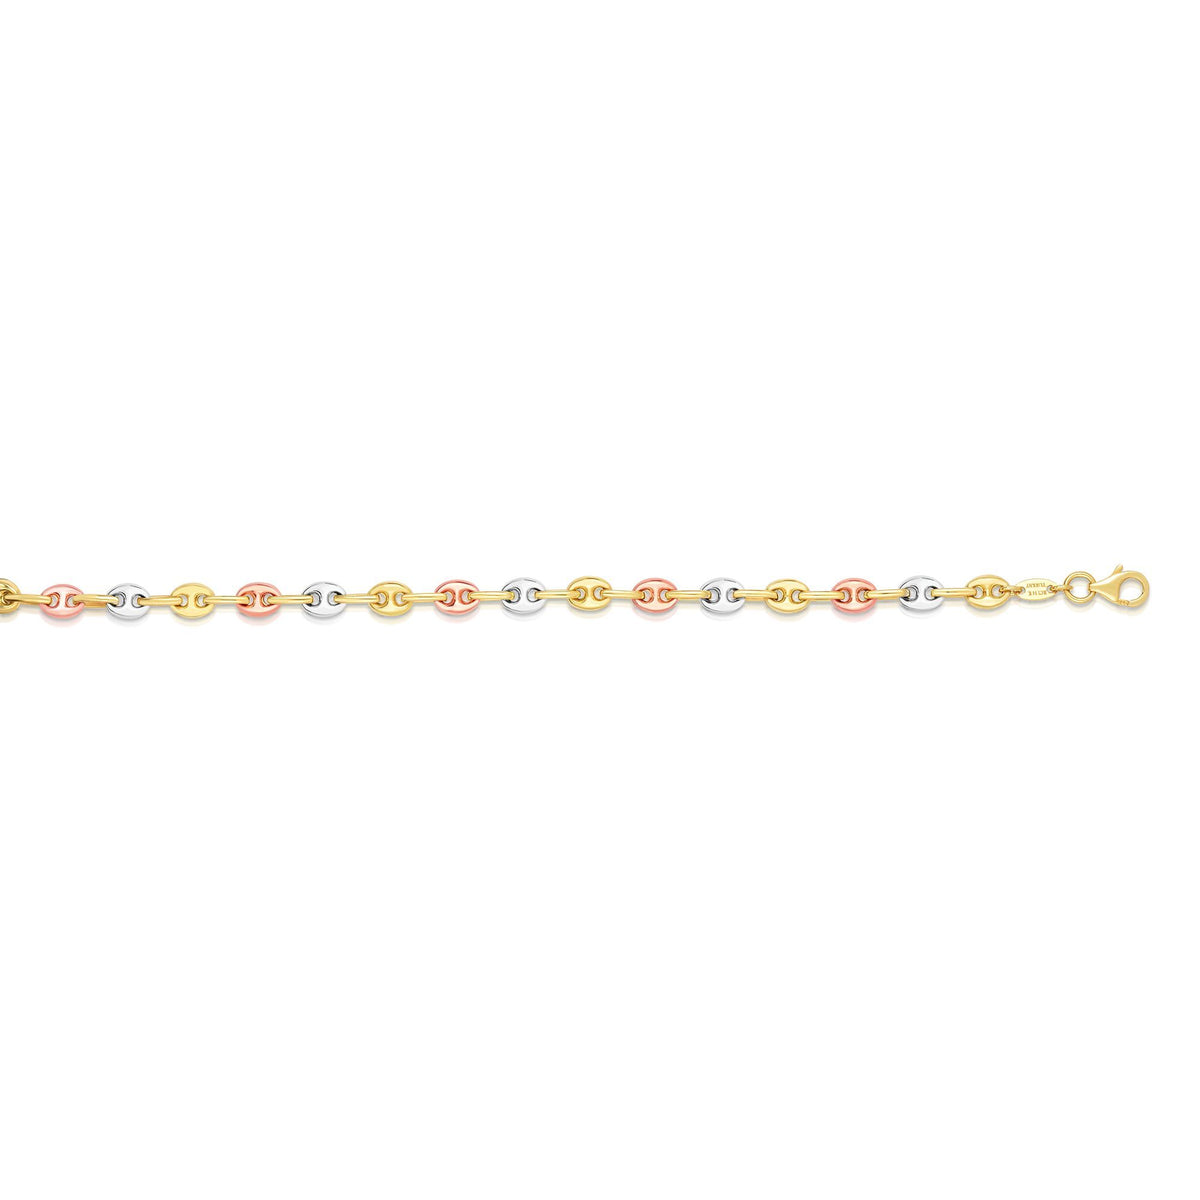 14k Yellow White And Rose Gold Mariner Link Bracelet, 7.25" fine designer jewelry for men and women